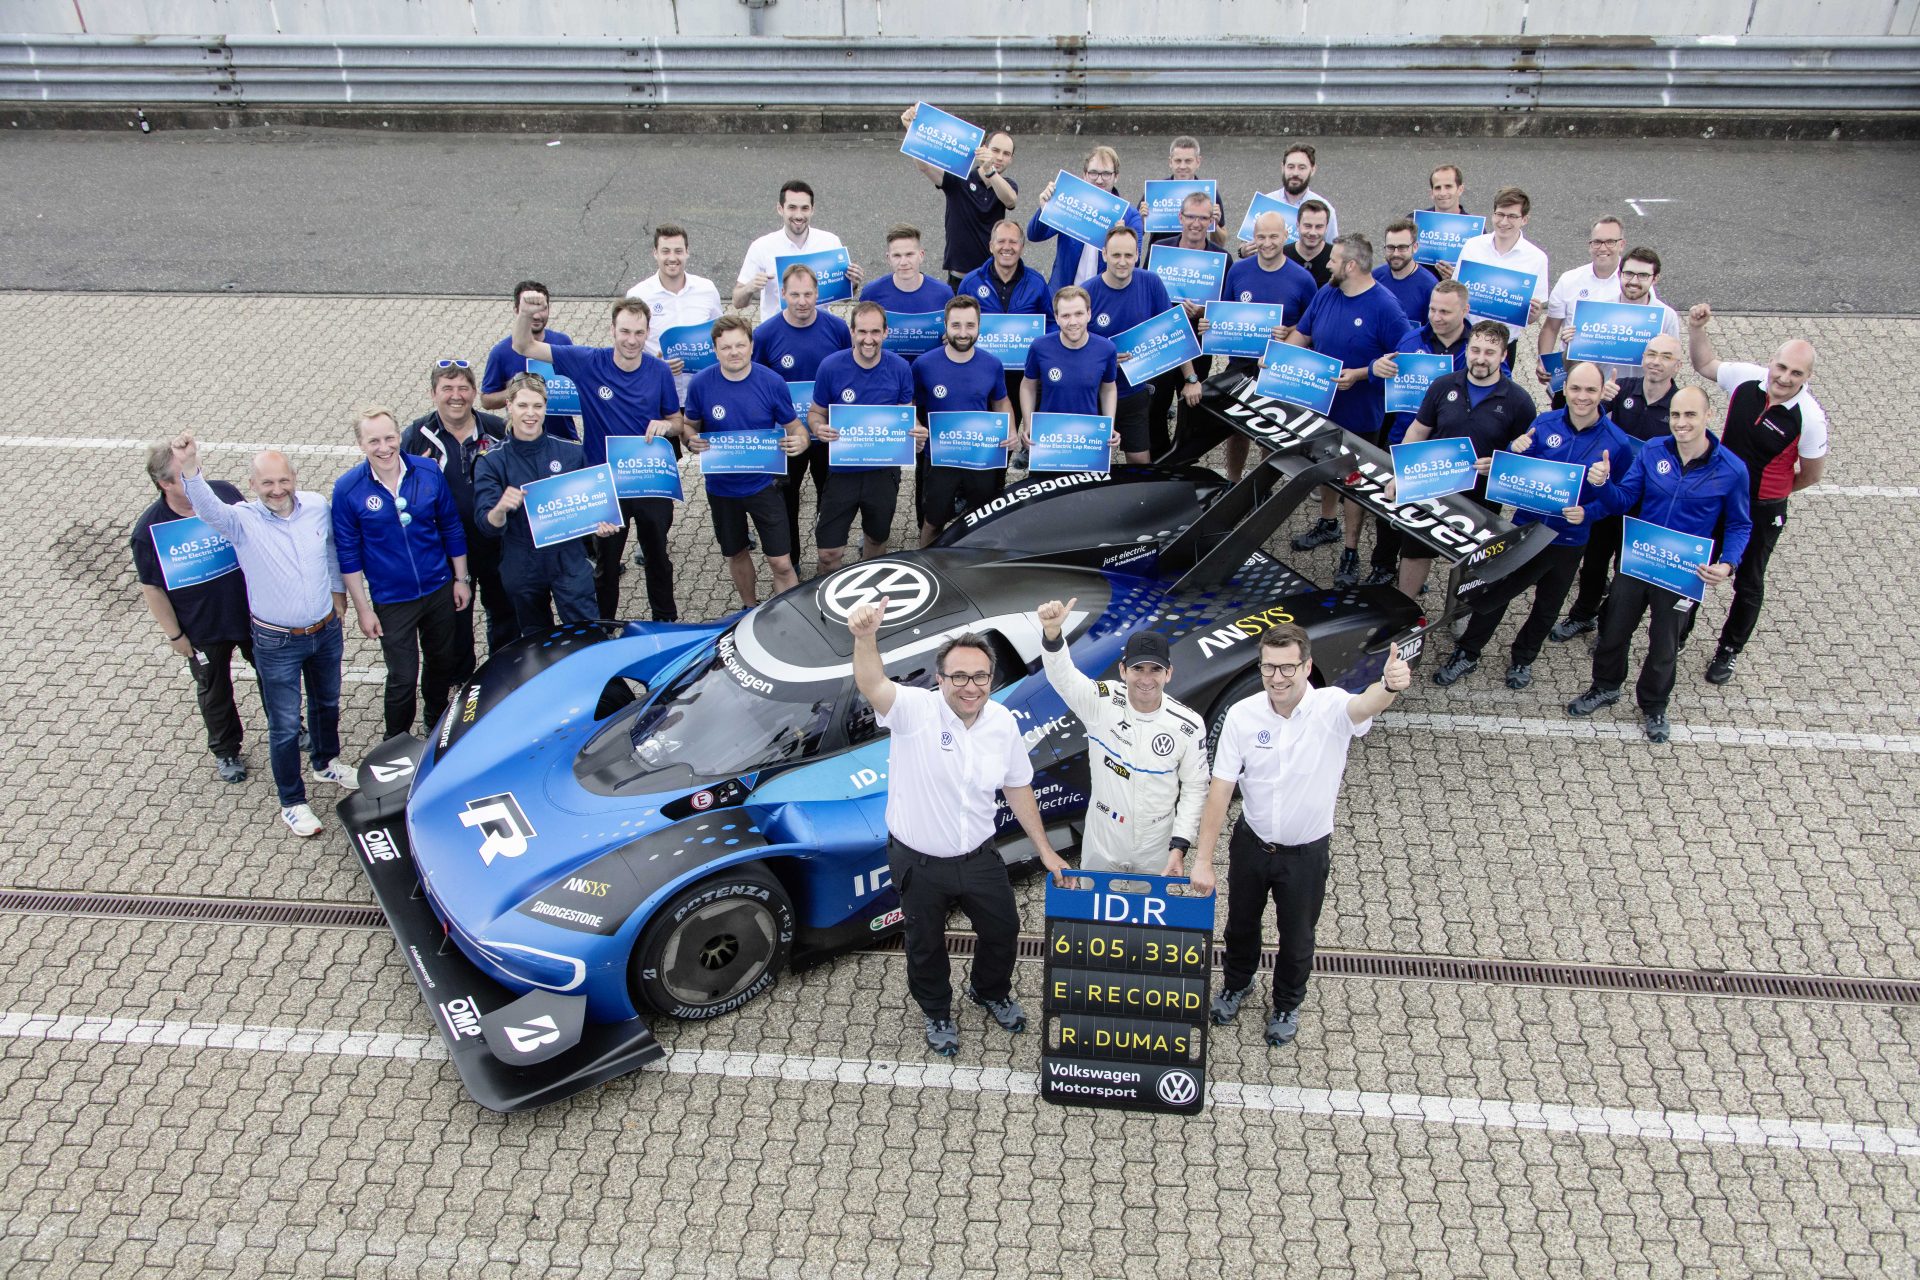 Team photo of Volkswagen Motorsport after setting a new e-record of 6:05.336 min at the Nürburgring-Nordschleife